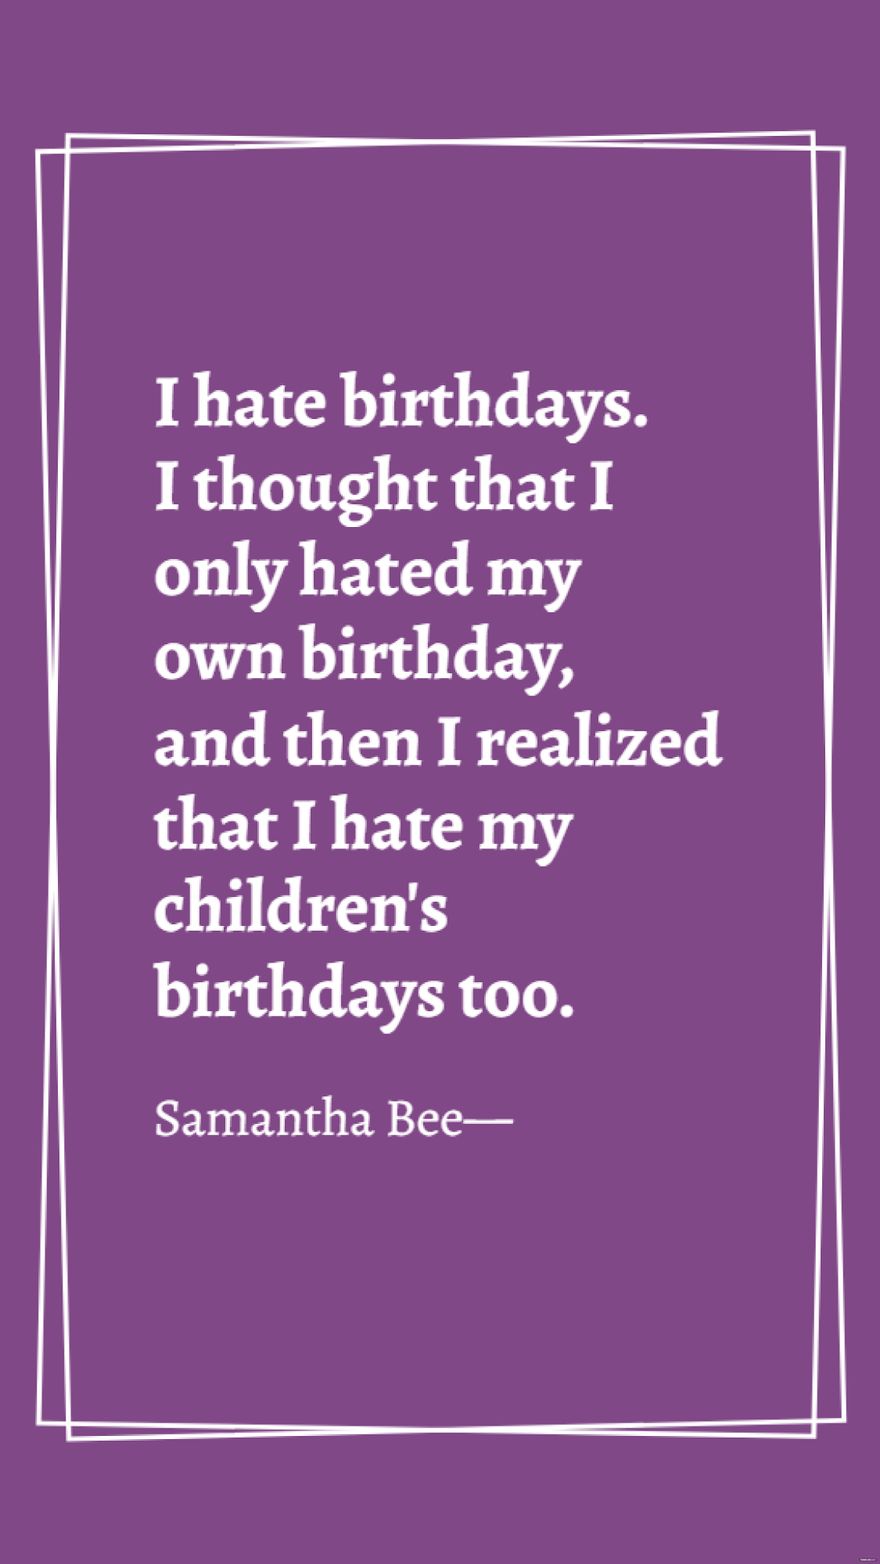 Free Samantha Bee - I hate birthdays. I thought that I only hated my own birthday, and then I realized that I hate my children's birthdays too. in JPG